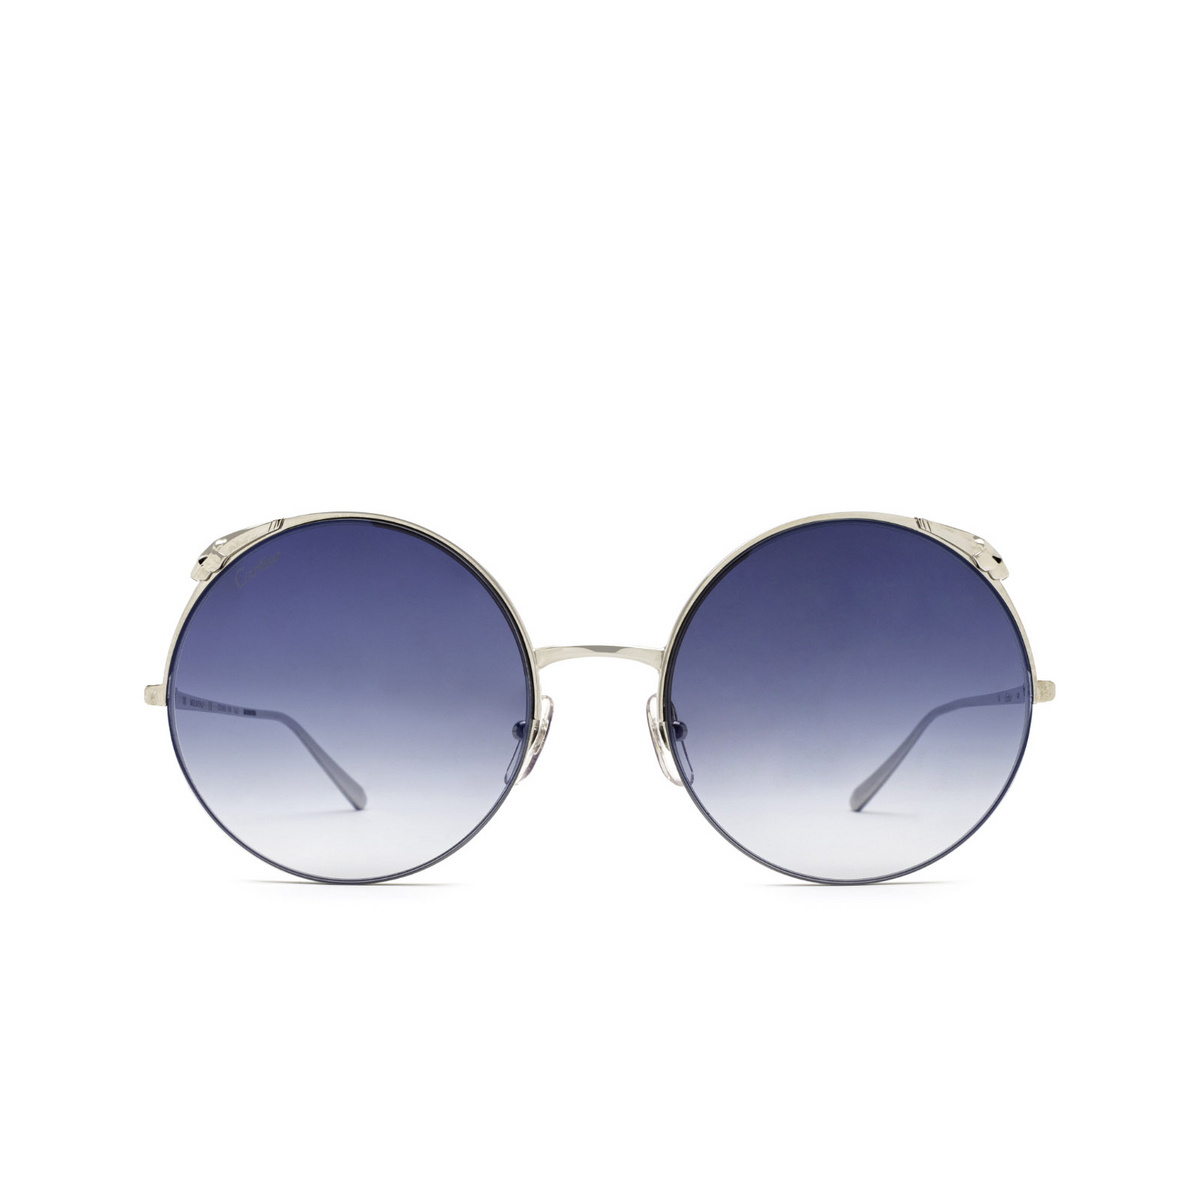 Cartier® Round Sunglasses: CT0149S color Silver 004 - front view.